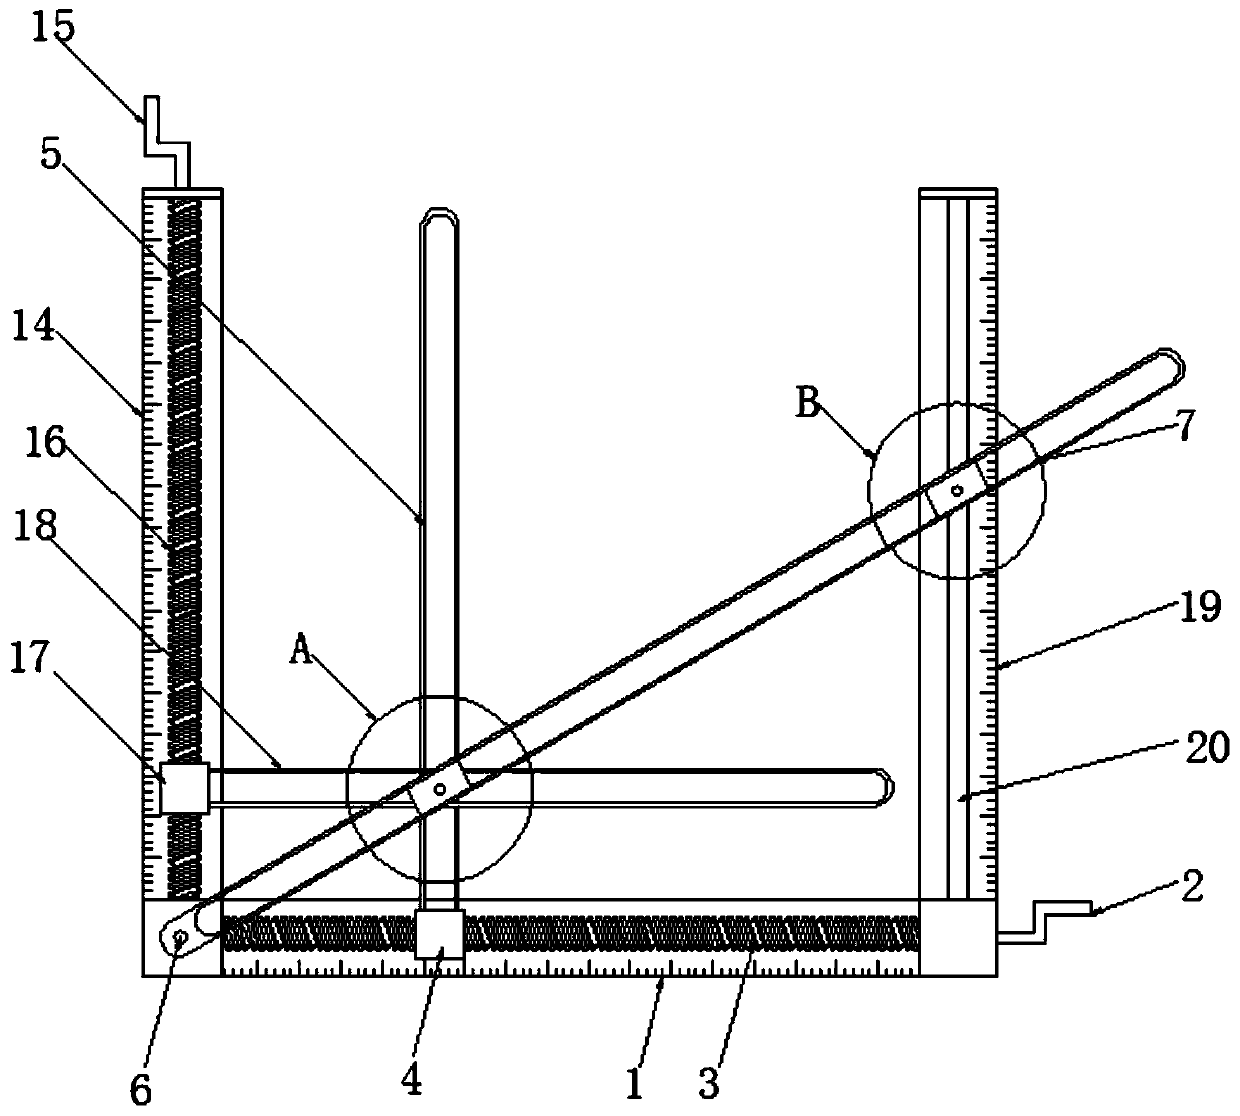 Auxiliary cutting measurement device for adjusting size of floor tile